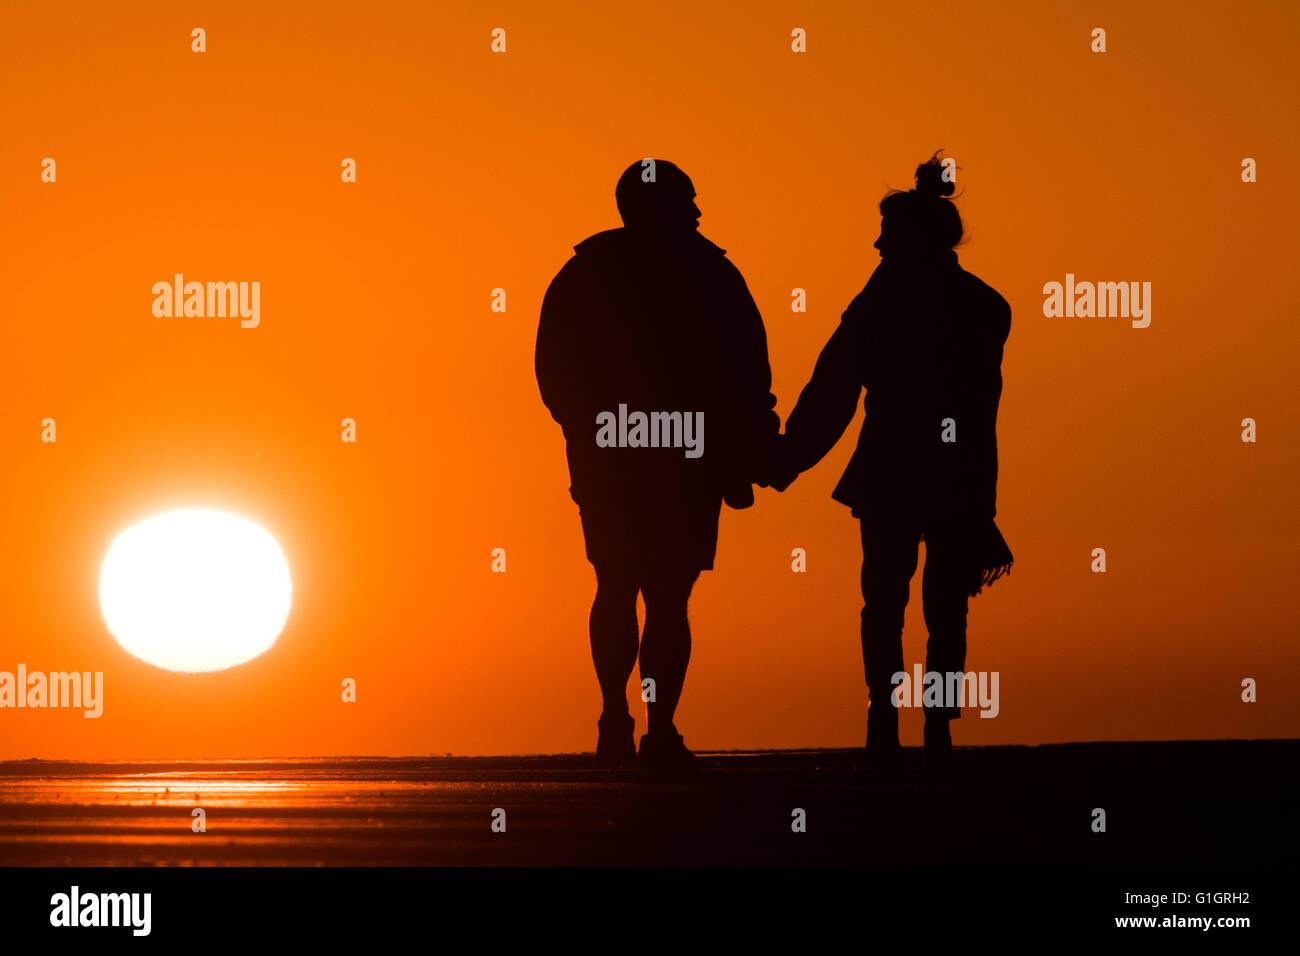 Aberystwyth , Wales UK, Saturday  14 May 2016   UK weather: A spectacular sunset at the end of day of clear skies and bright sunshine, as a couple  walk hand in hand  along the harbour in   Aberystwyth on the Cardigan Bay coastline of west wales.  photo Credit:  Keith Morris/Alamy Live News Stock Photo